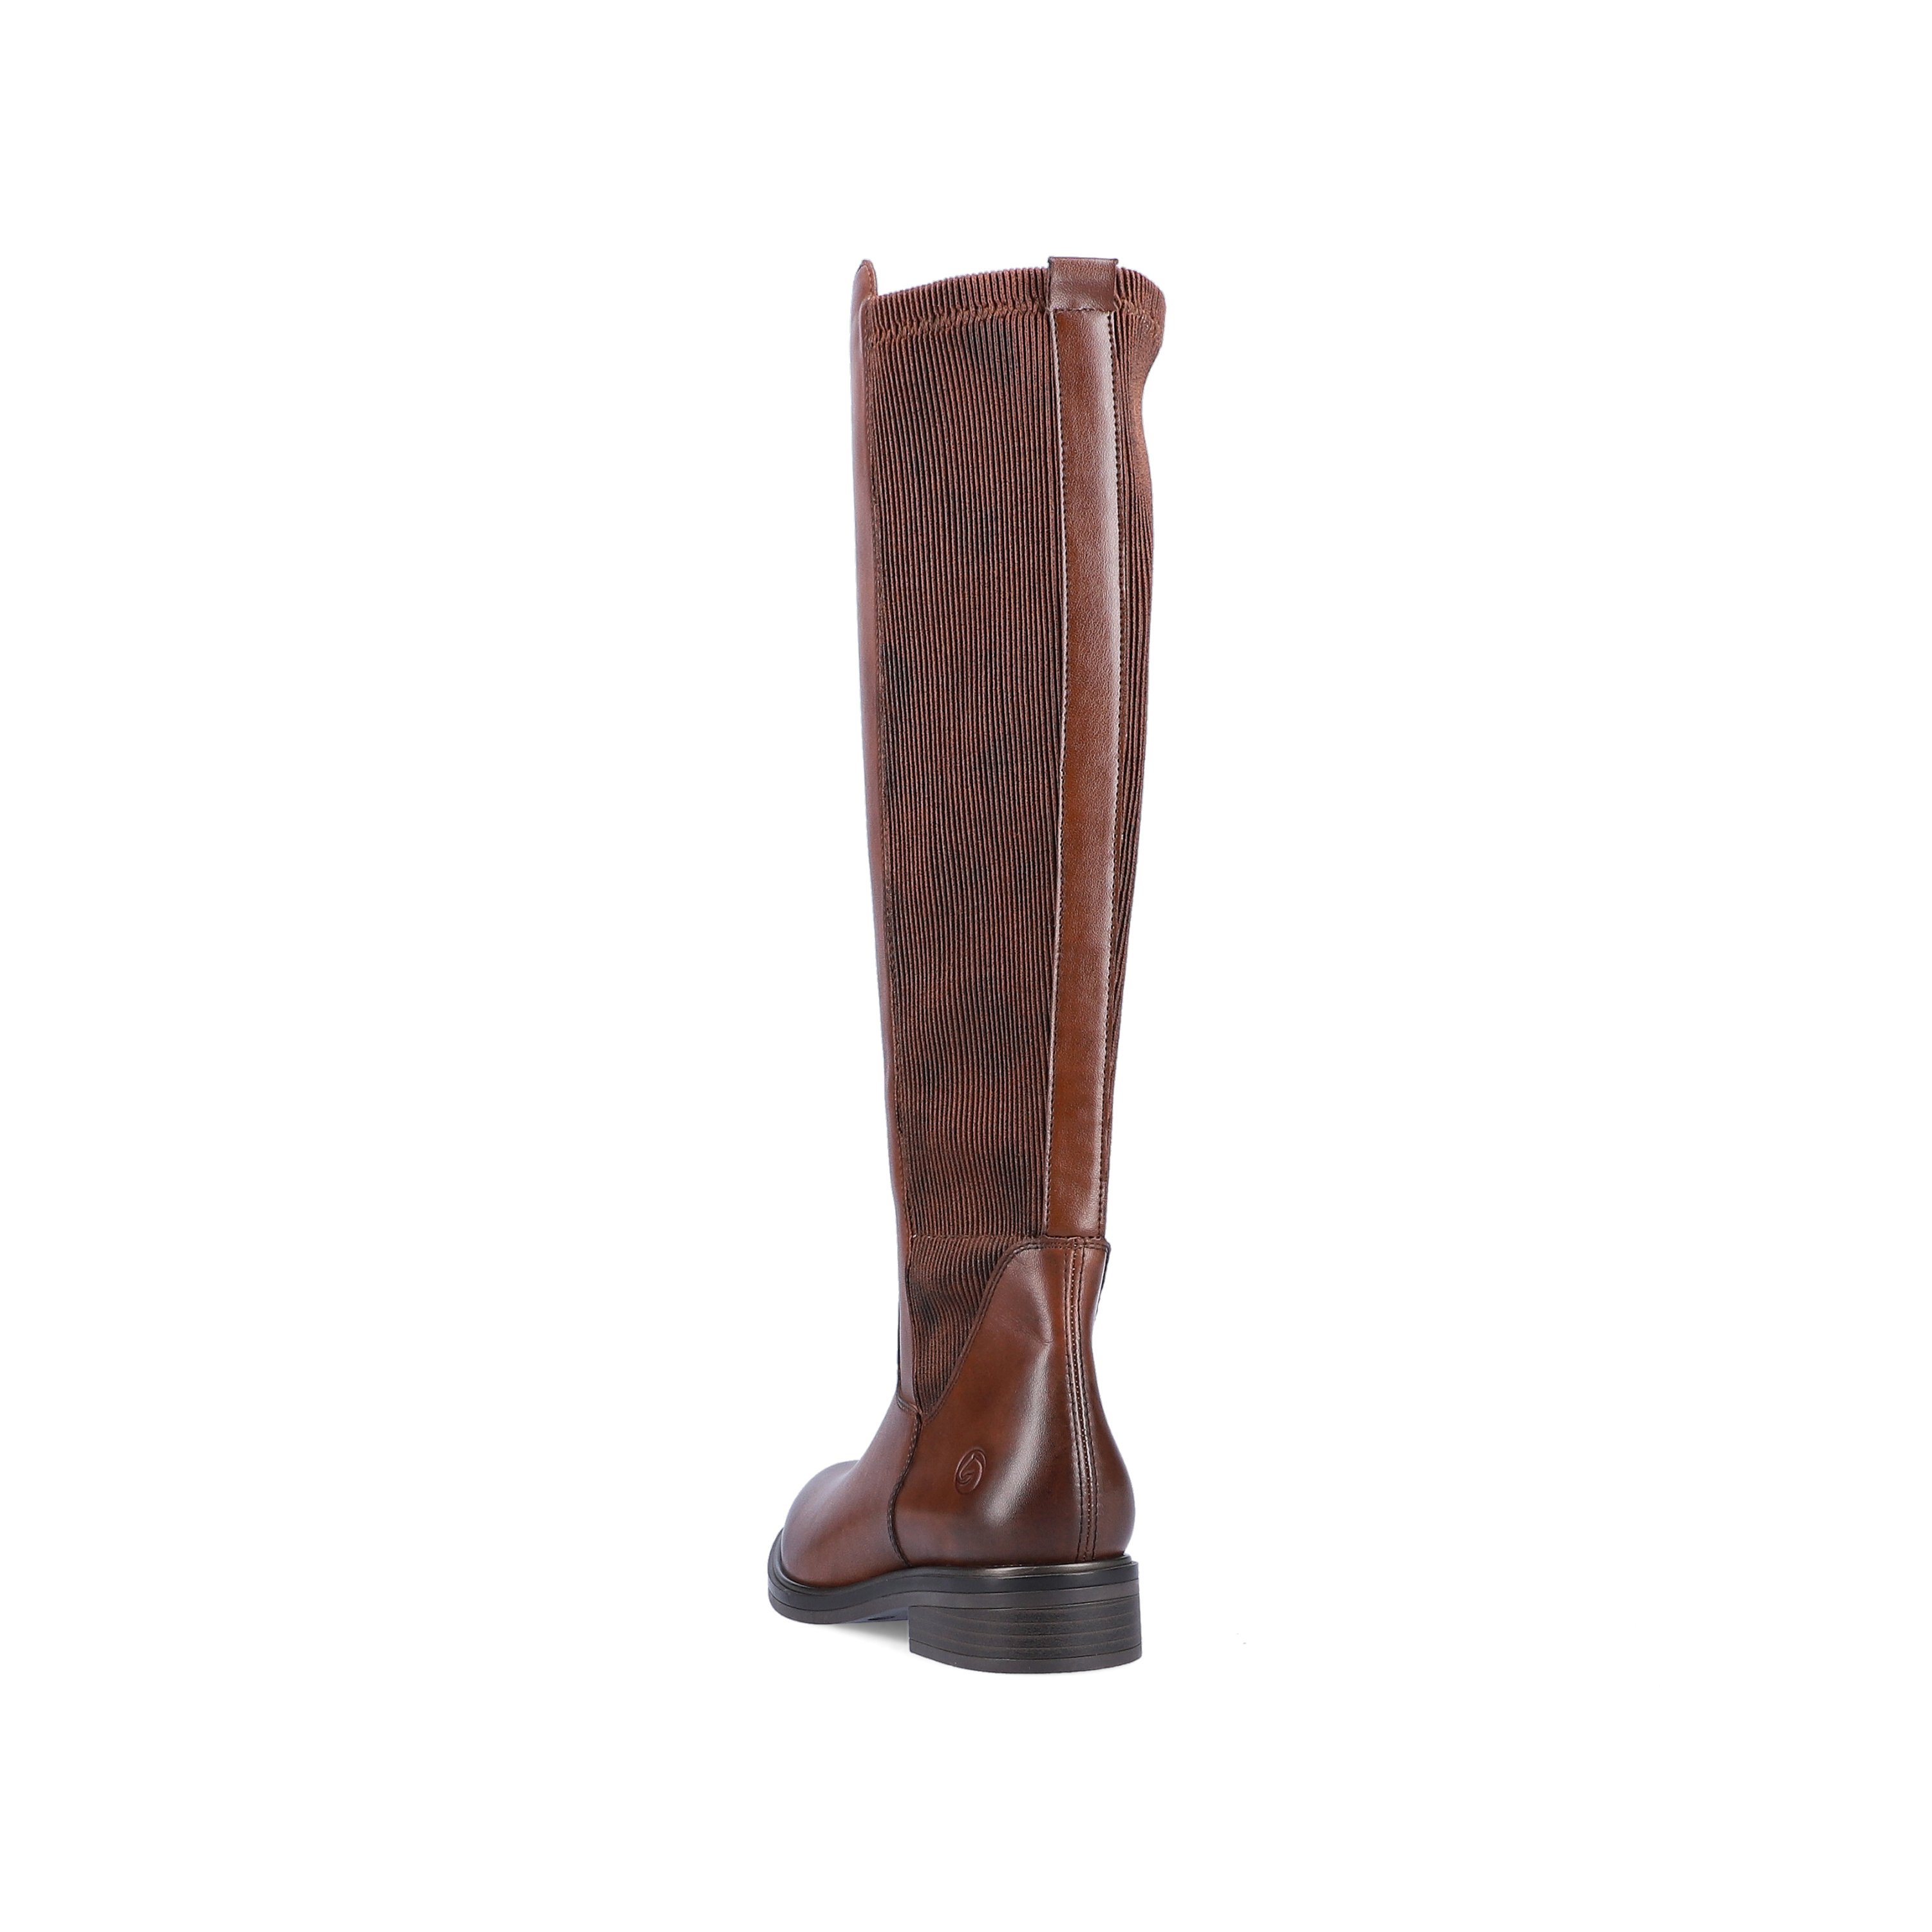 Hazel remonte women´s high boots D8371-25 with zipper as well as profile sole. Shoe from the back